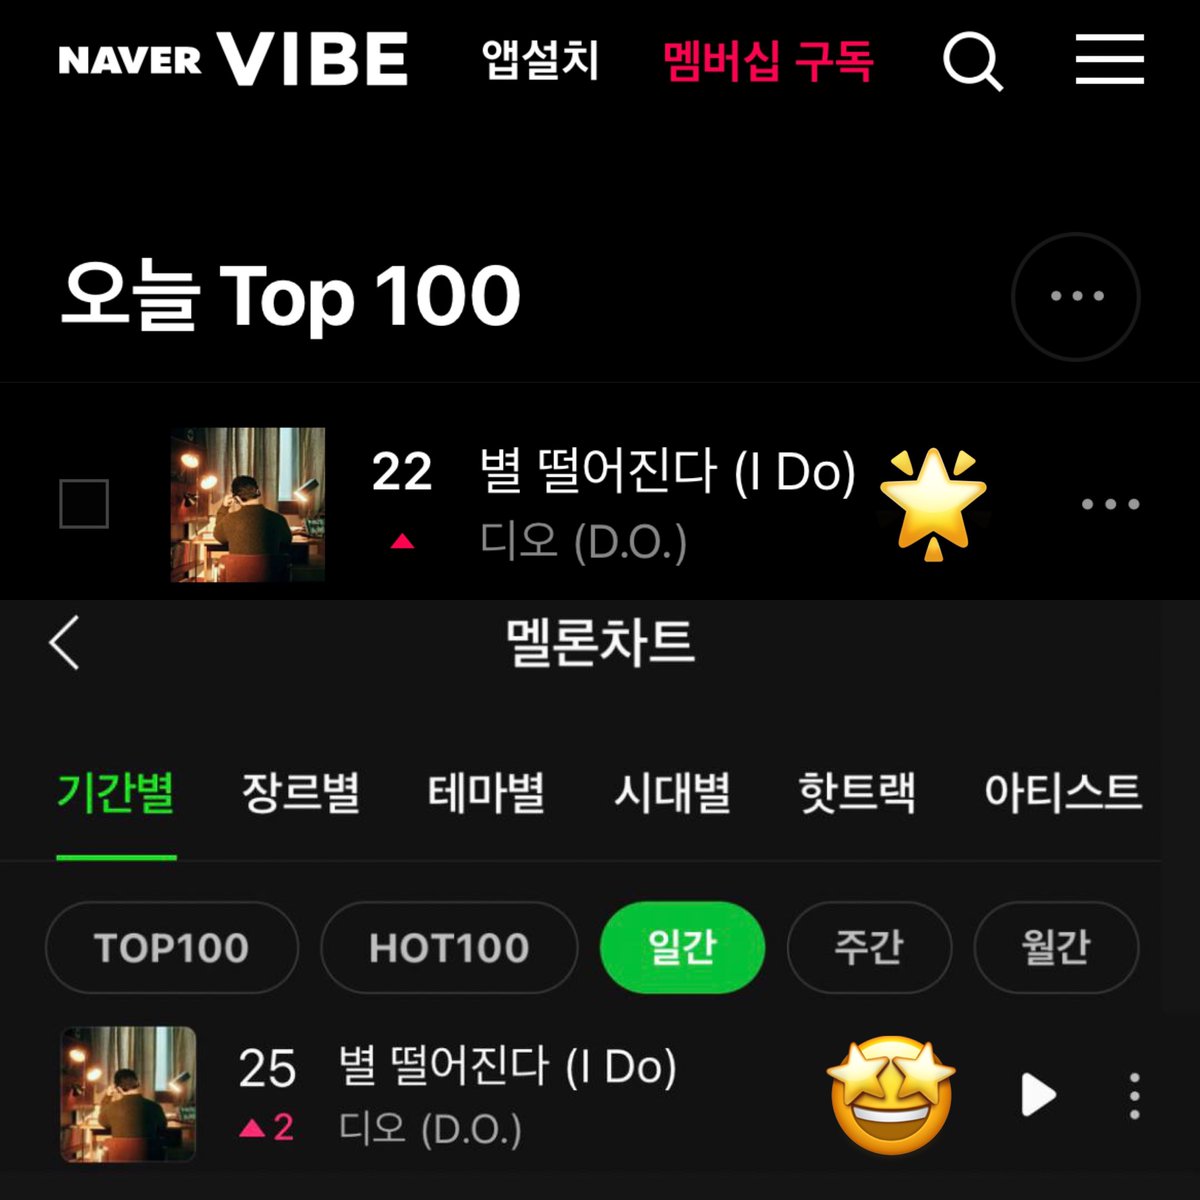 📢 DAILY CHARTS 📢 'I Do' by D.O. reaches NEW HIGHEST PEAKS on MelOn and VIBE daily charts!🤟🏻 “I Do” by D.O. — 23.11.27 #22 VIBE [+2] *NEW PEAK* #25 Melon [+2] *NEW PEAK* 'I Do' by D.O. keeps receiving an incredible amount of love🥰 Congratulations to Kyungsoo!👏🏻 #도경수…